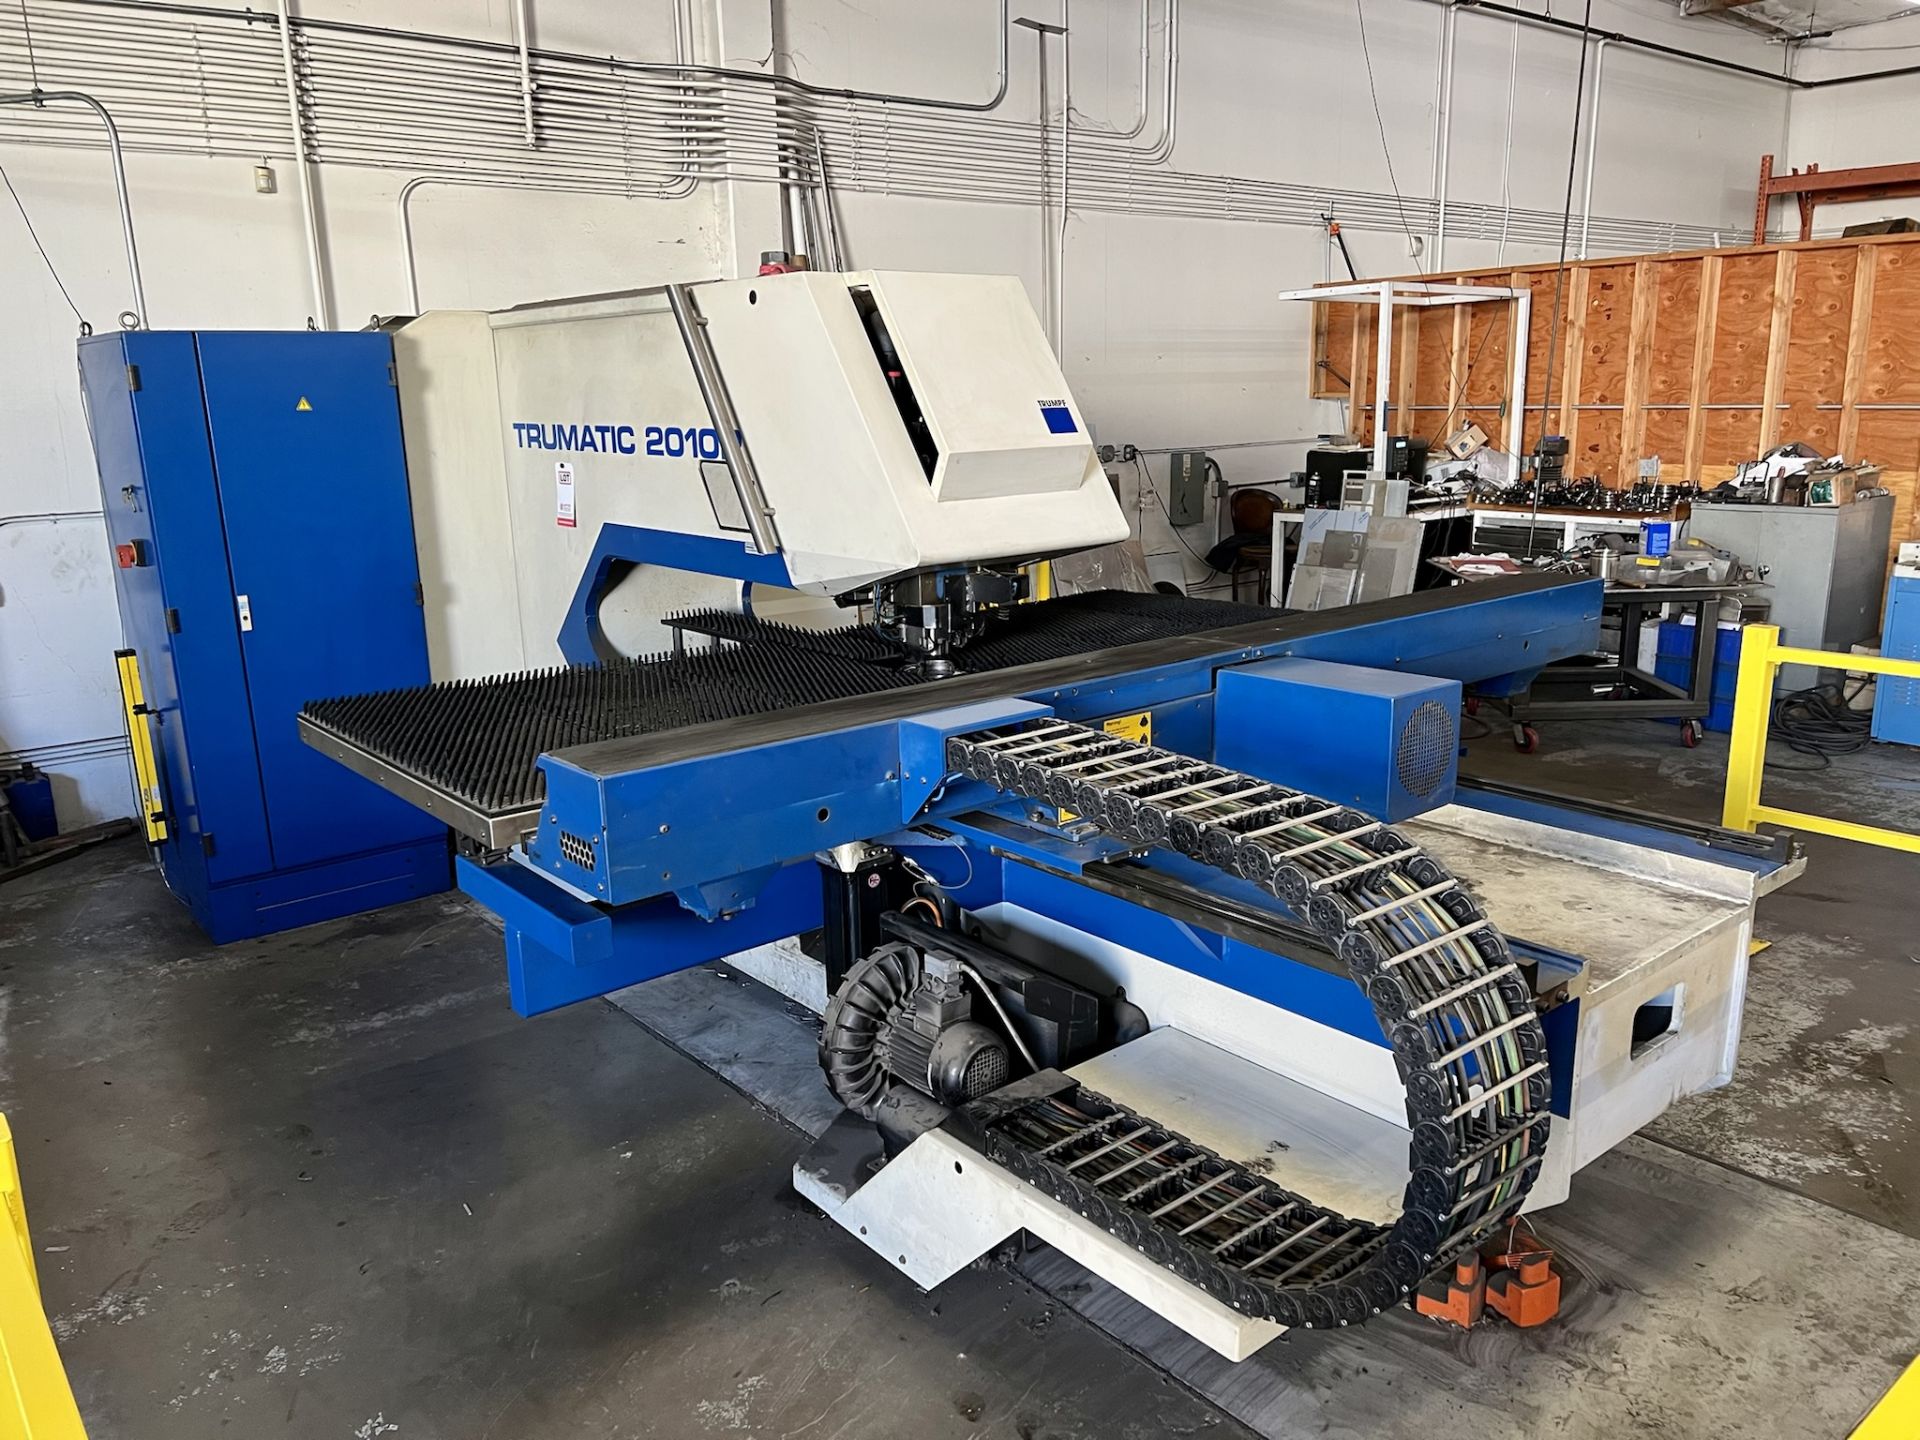 2006 TRUMPF TRUMATIC 2010R CNC TURRET PUNCH, 50" X 50" TABLE, MULTI SET, PUNCH TOOLING AND CABINETS - Image 2 of 52